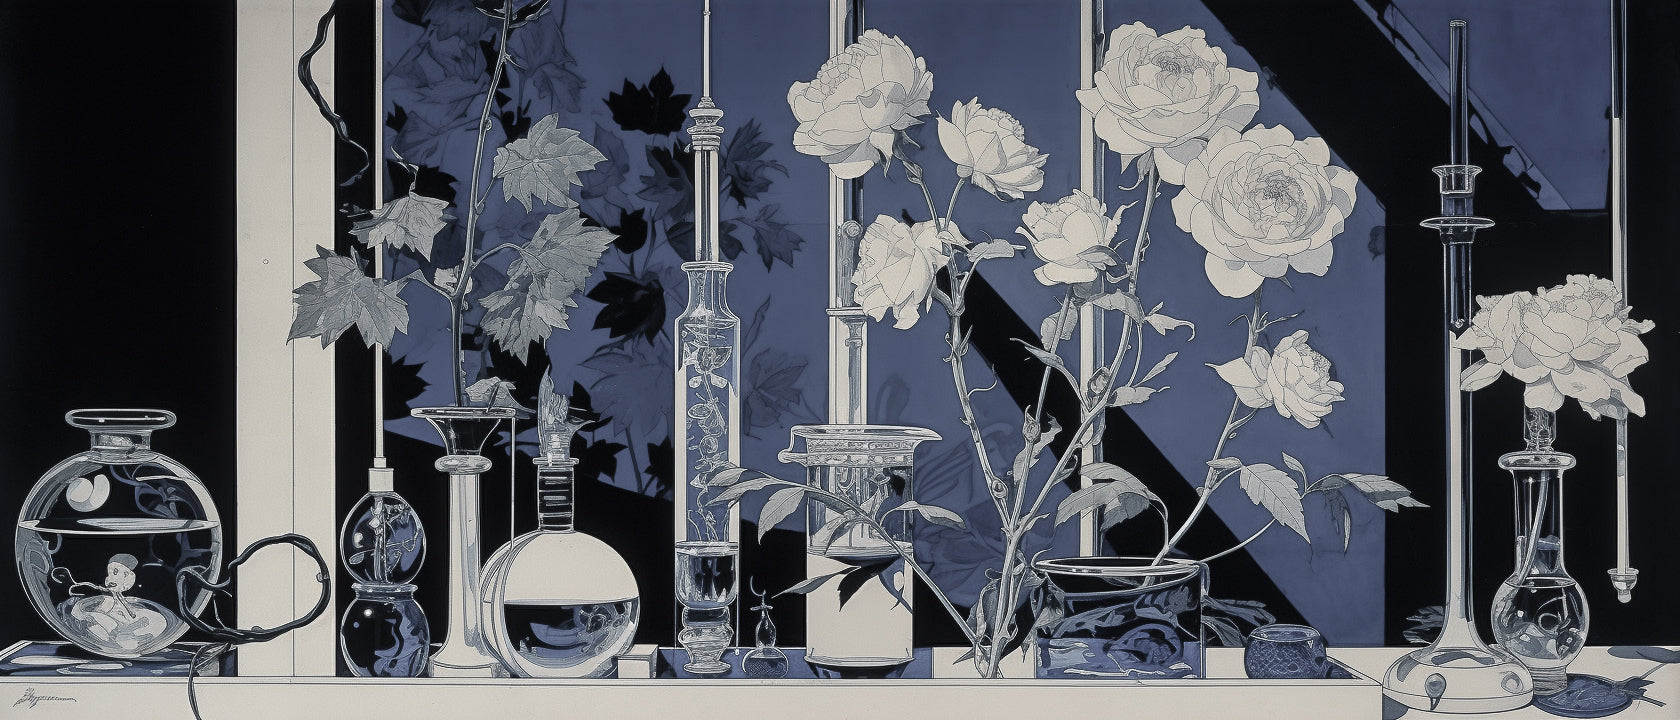 The Transformation of Nature into Fragrance: A Chemical Insight into the Art of Perfumery